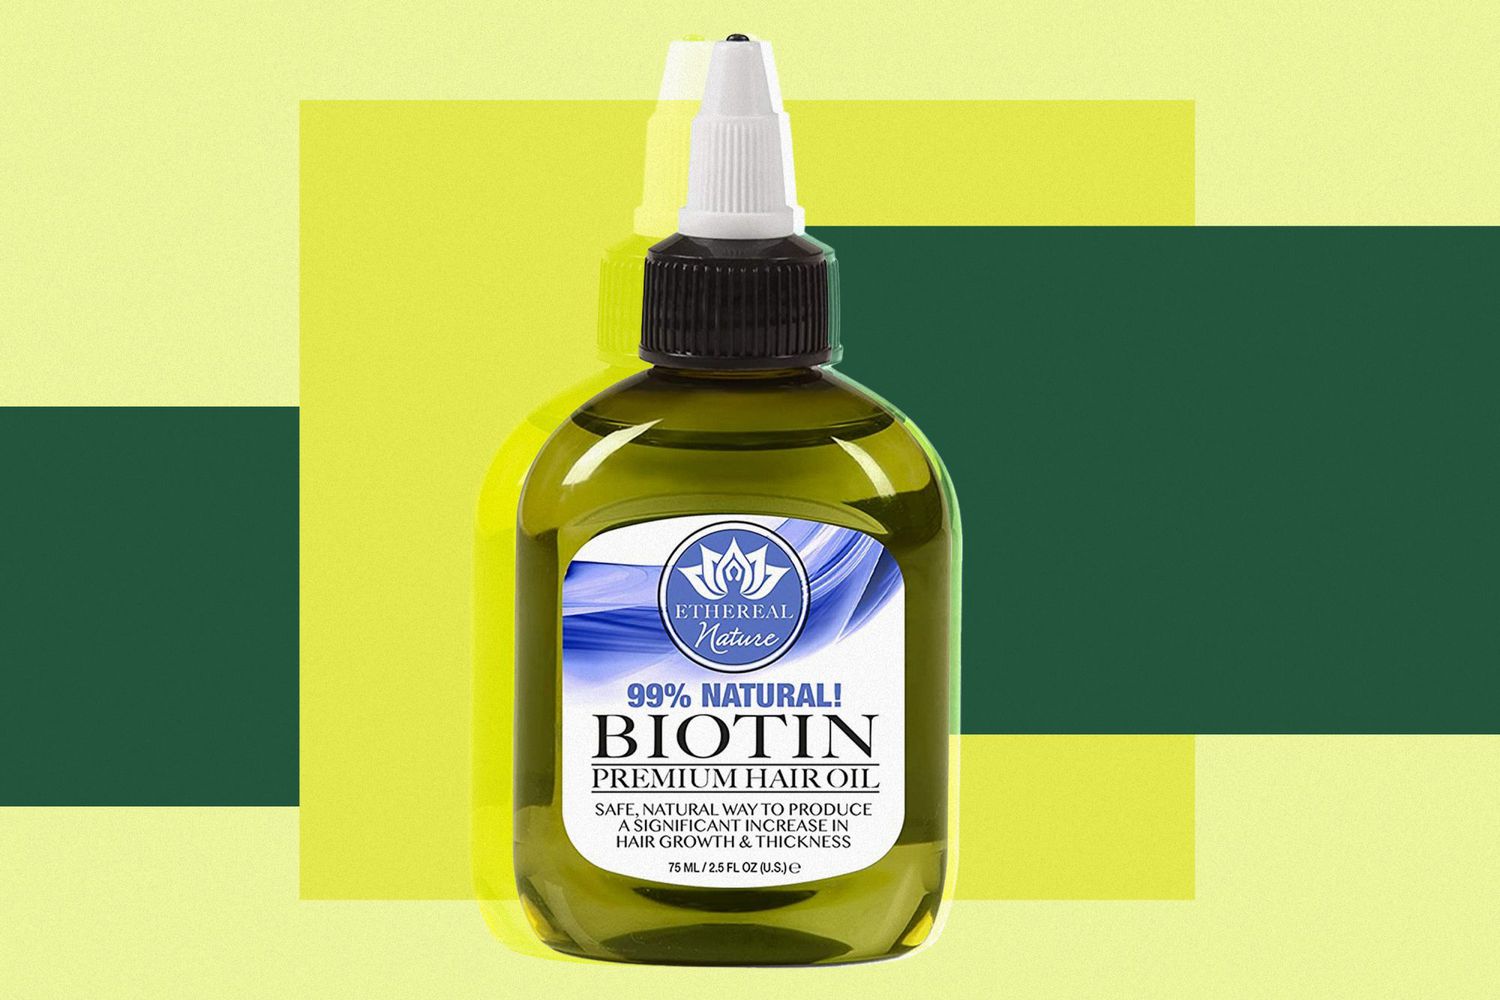 How to Make Biotin Oil at Home